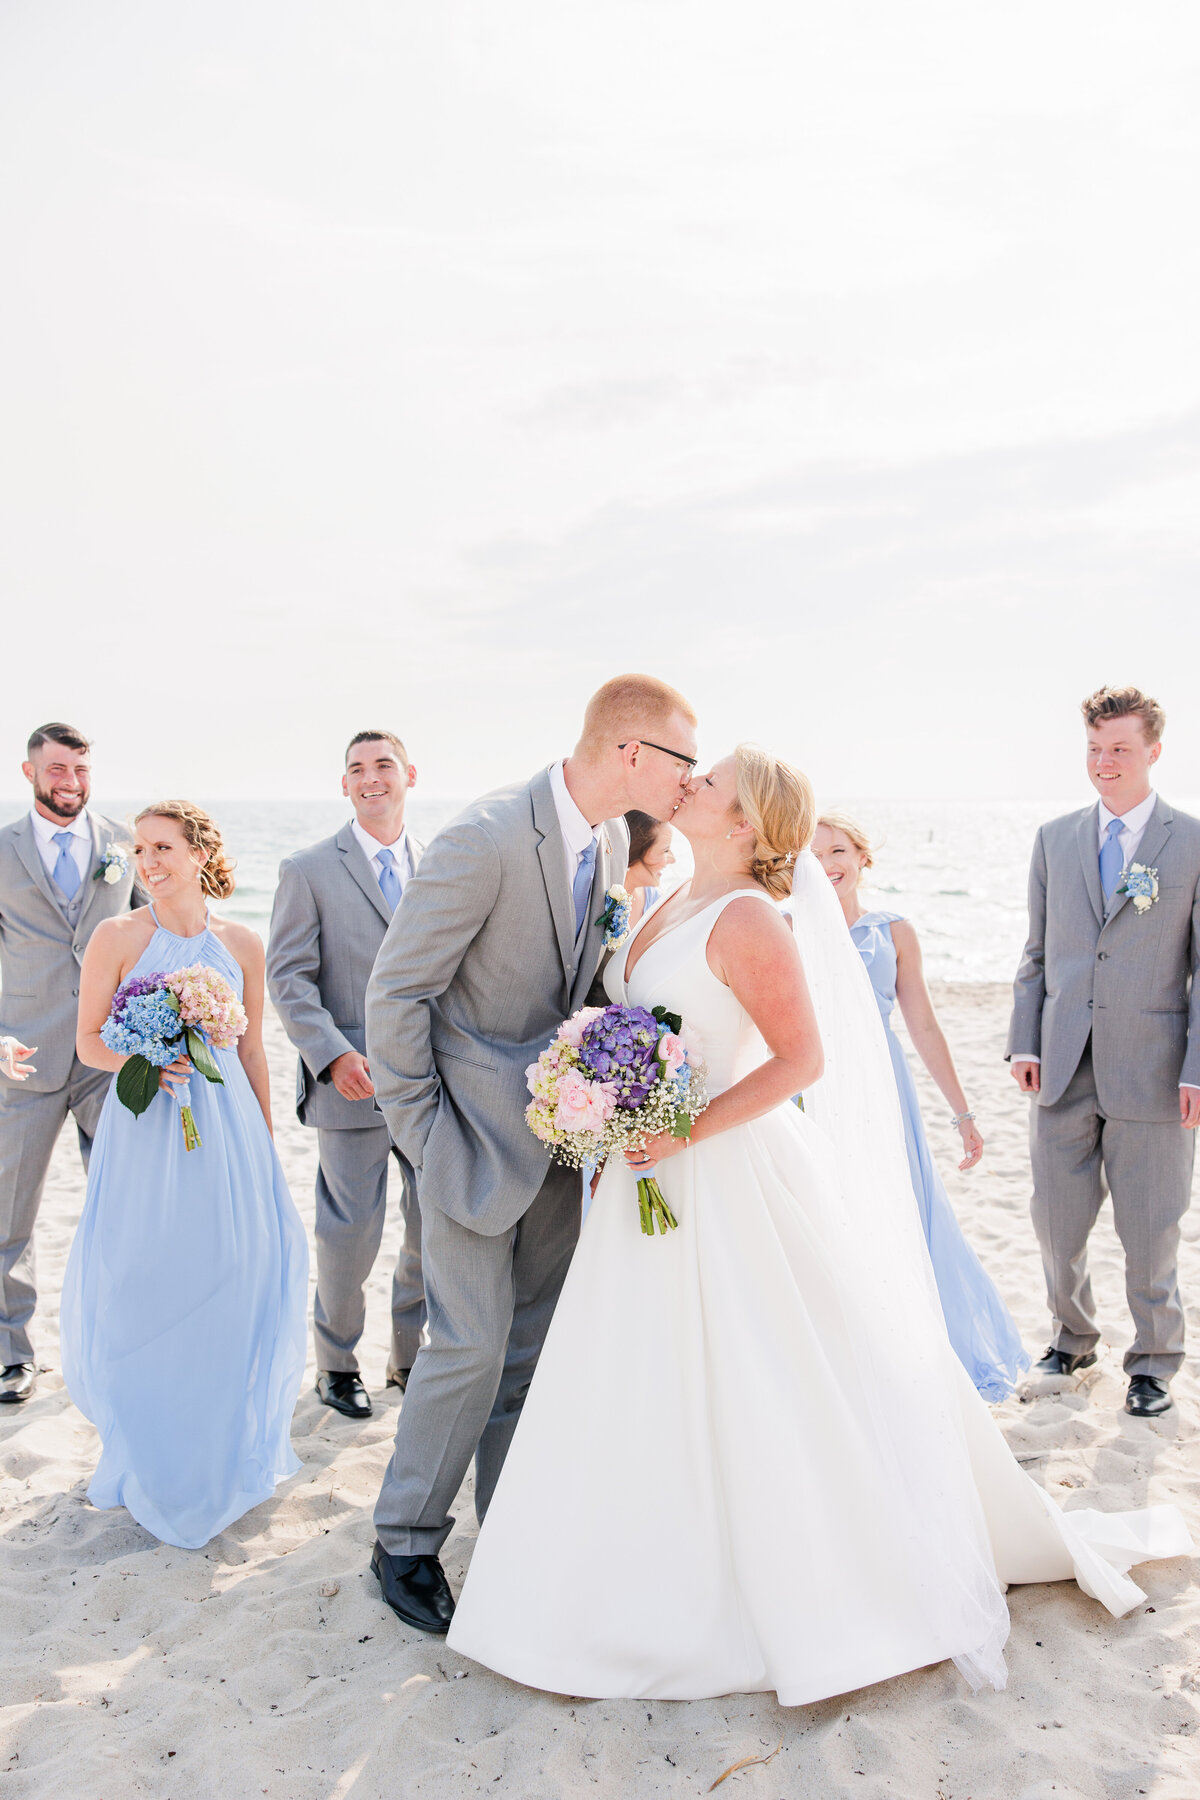 A bride and groom kissing while their wedding party laughs representing a joyful Cape Cod wedding photographer